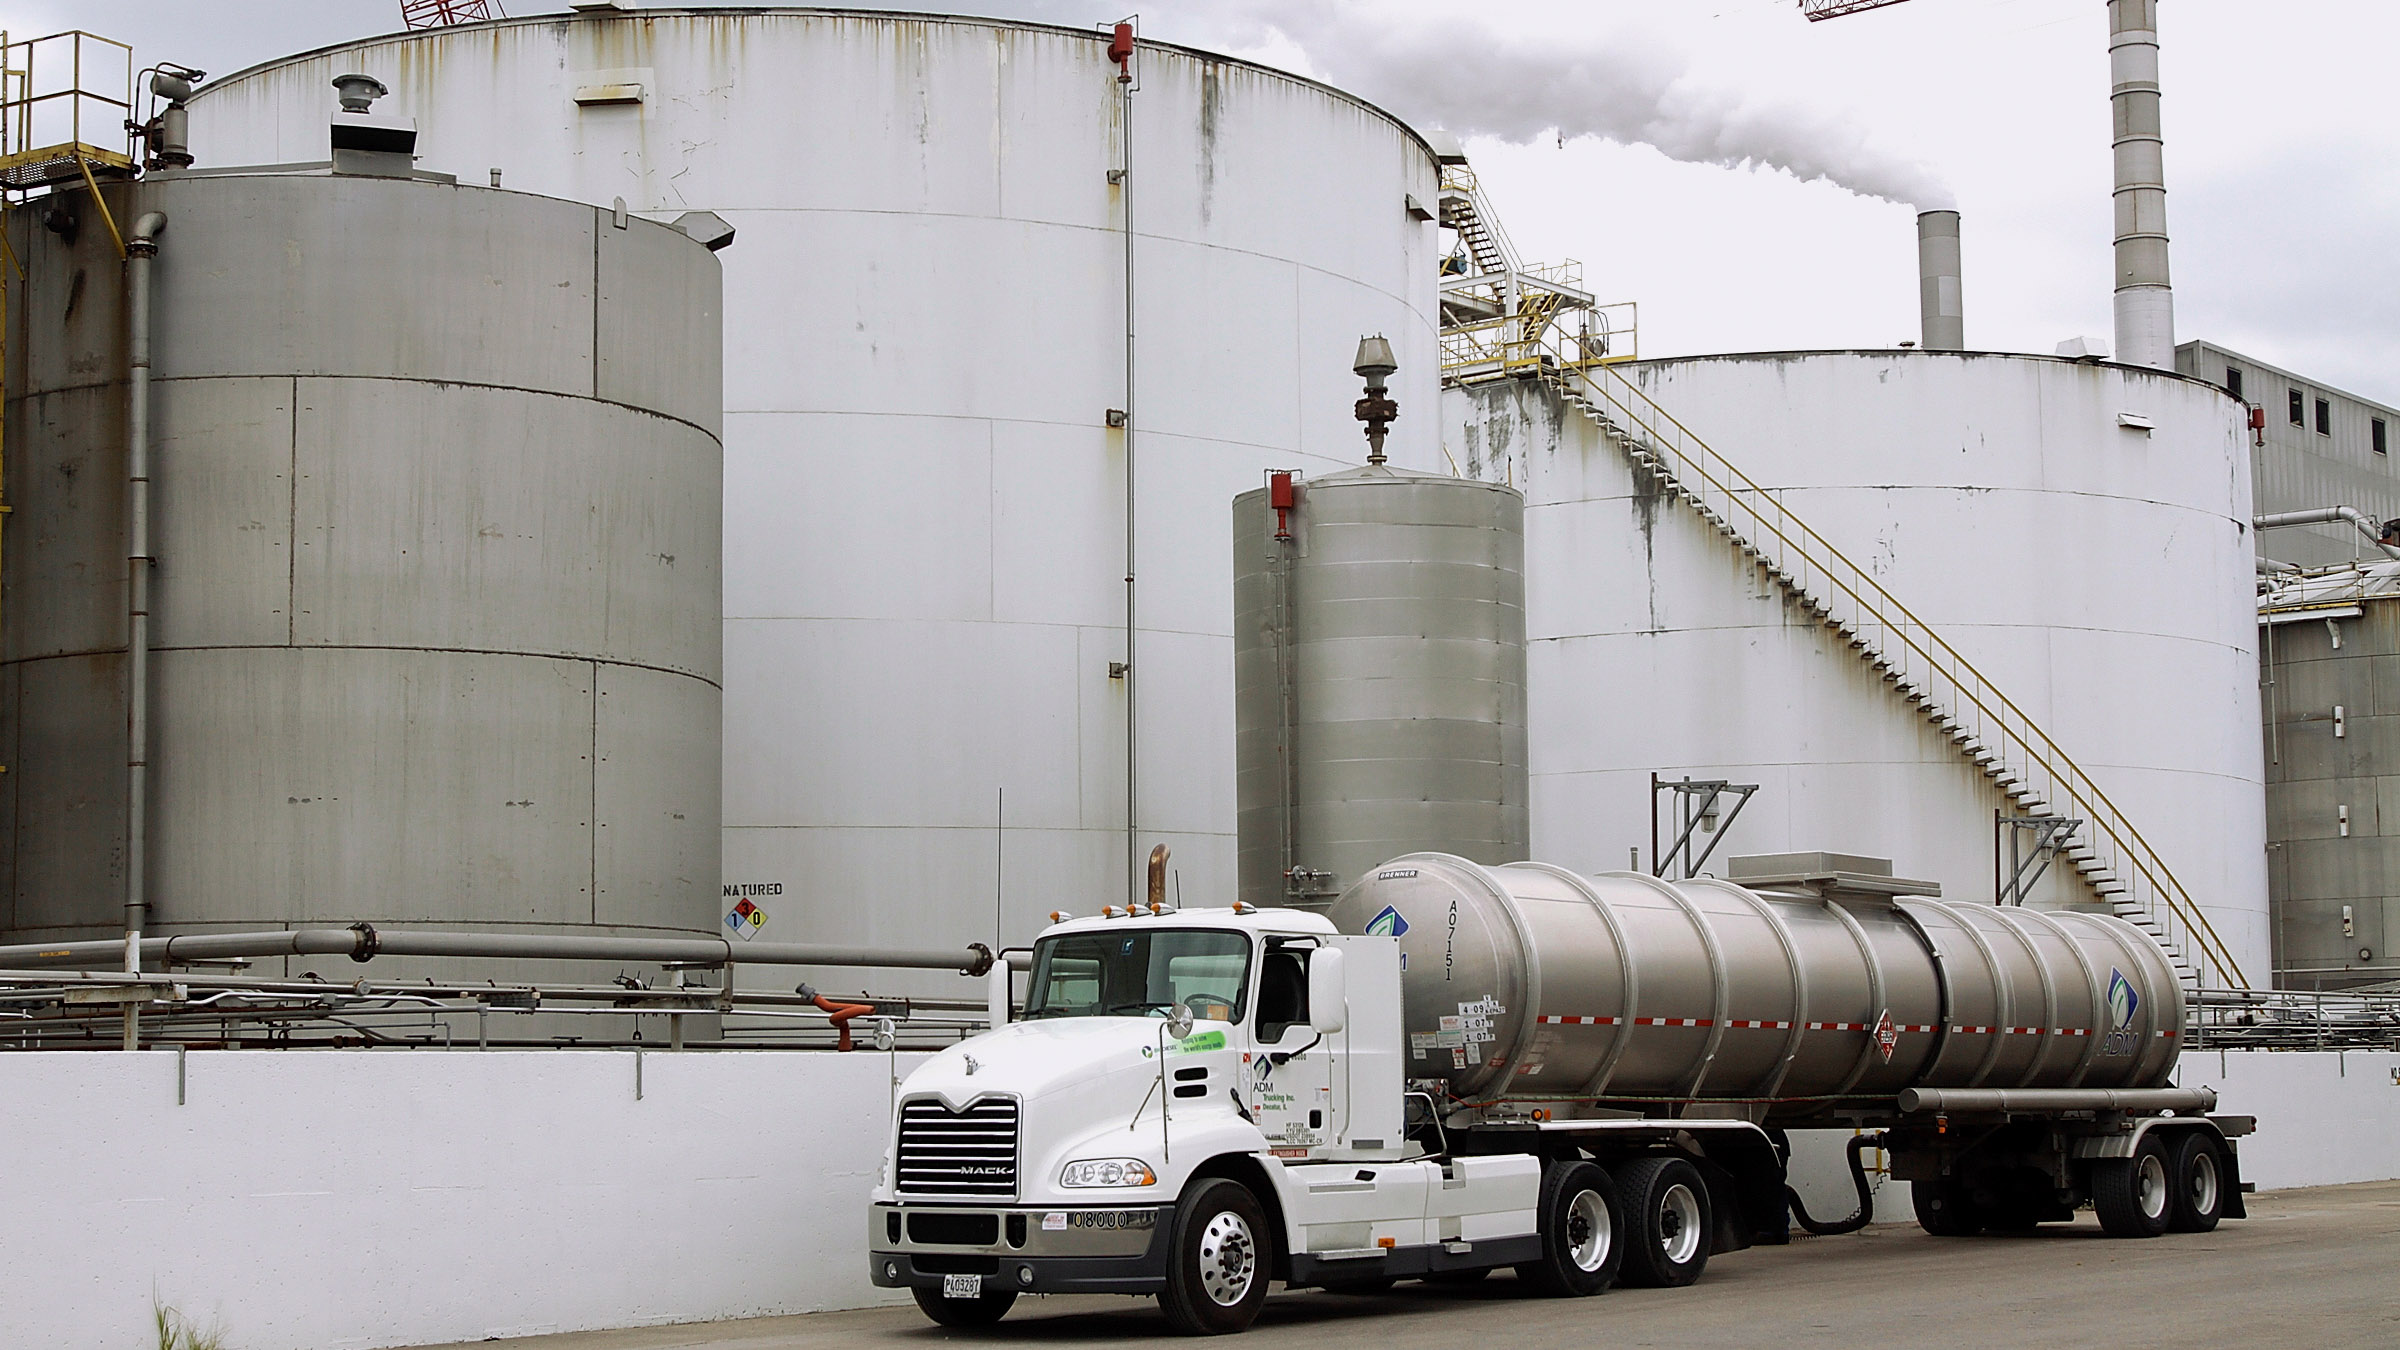 A tanker truck loaded up with ethanol prepares to leave the Archer Daniels Midland Company plant in Decatur, Ill